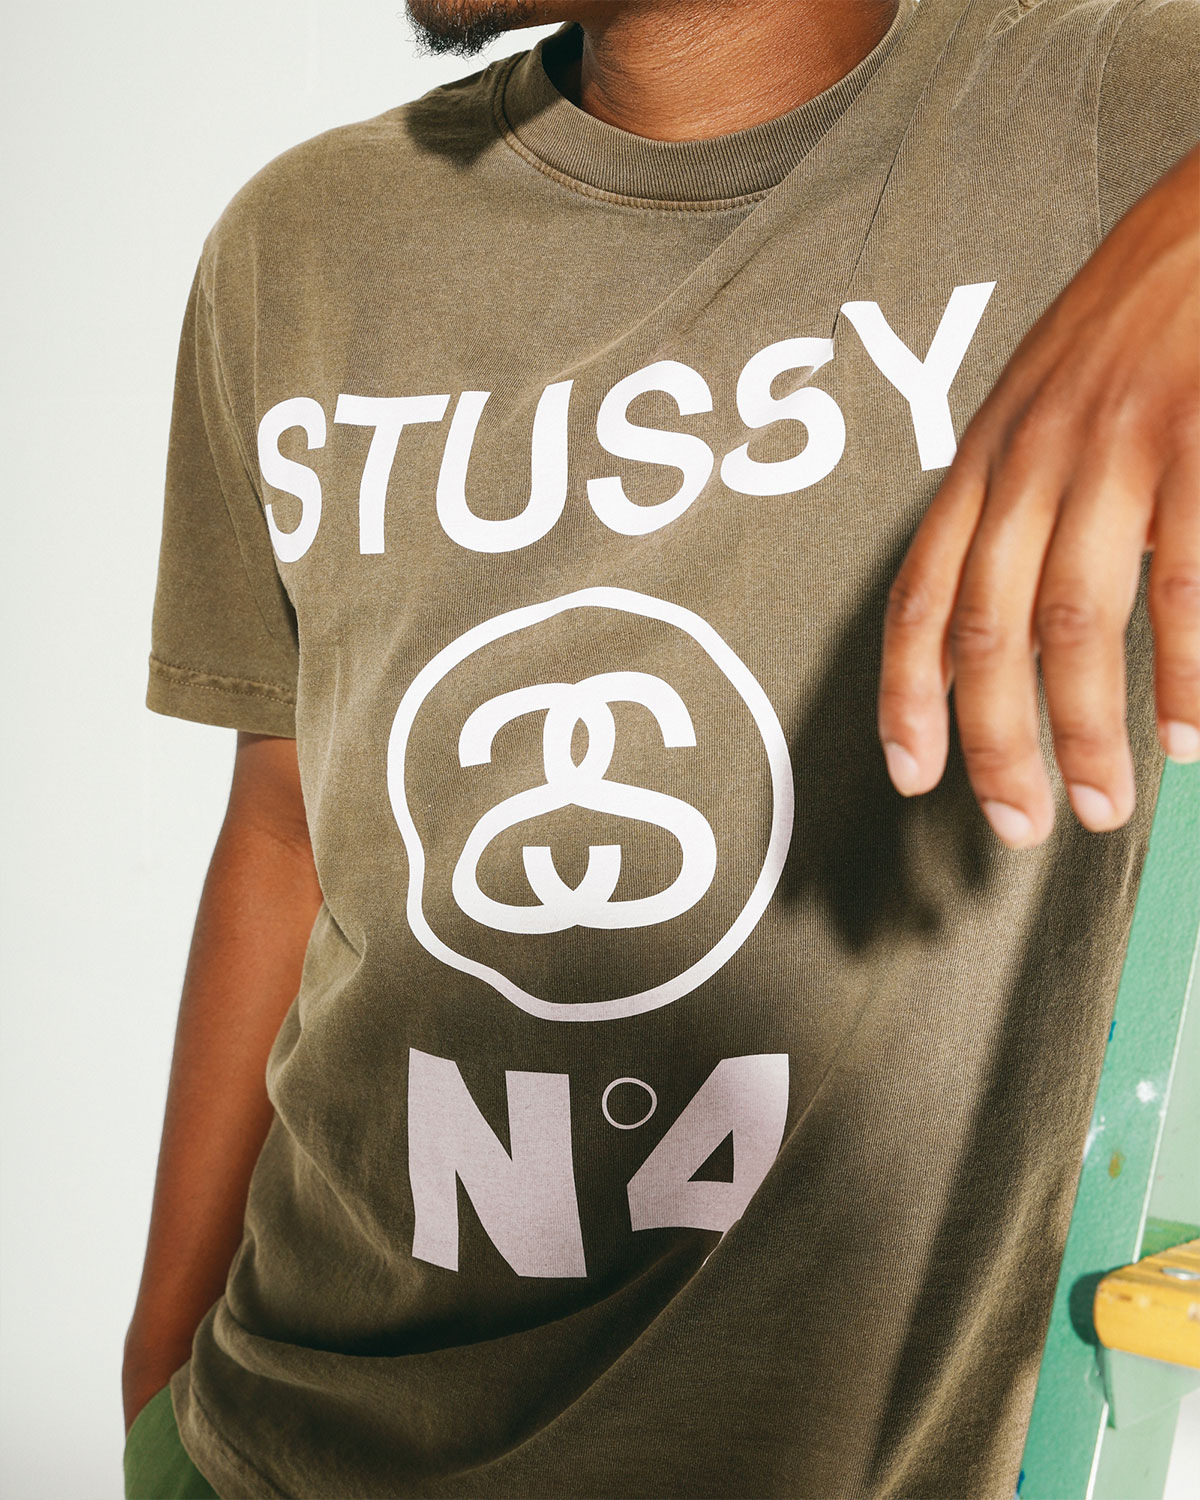 The new Stussy drop is here